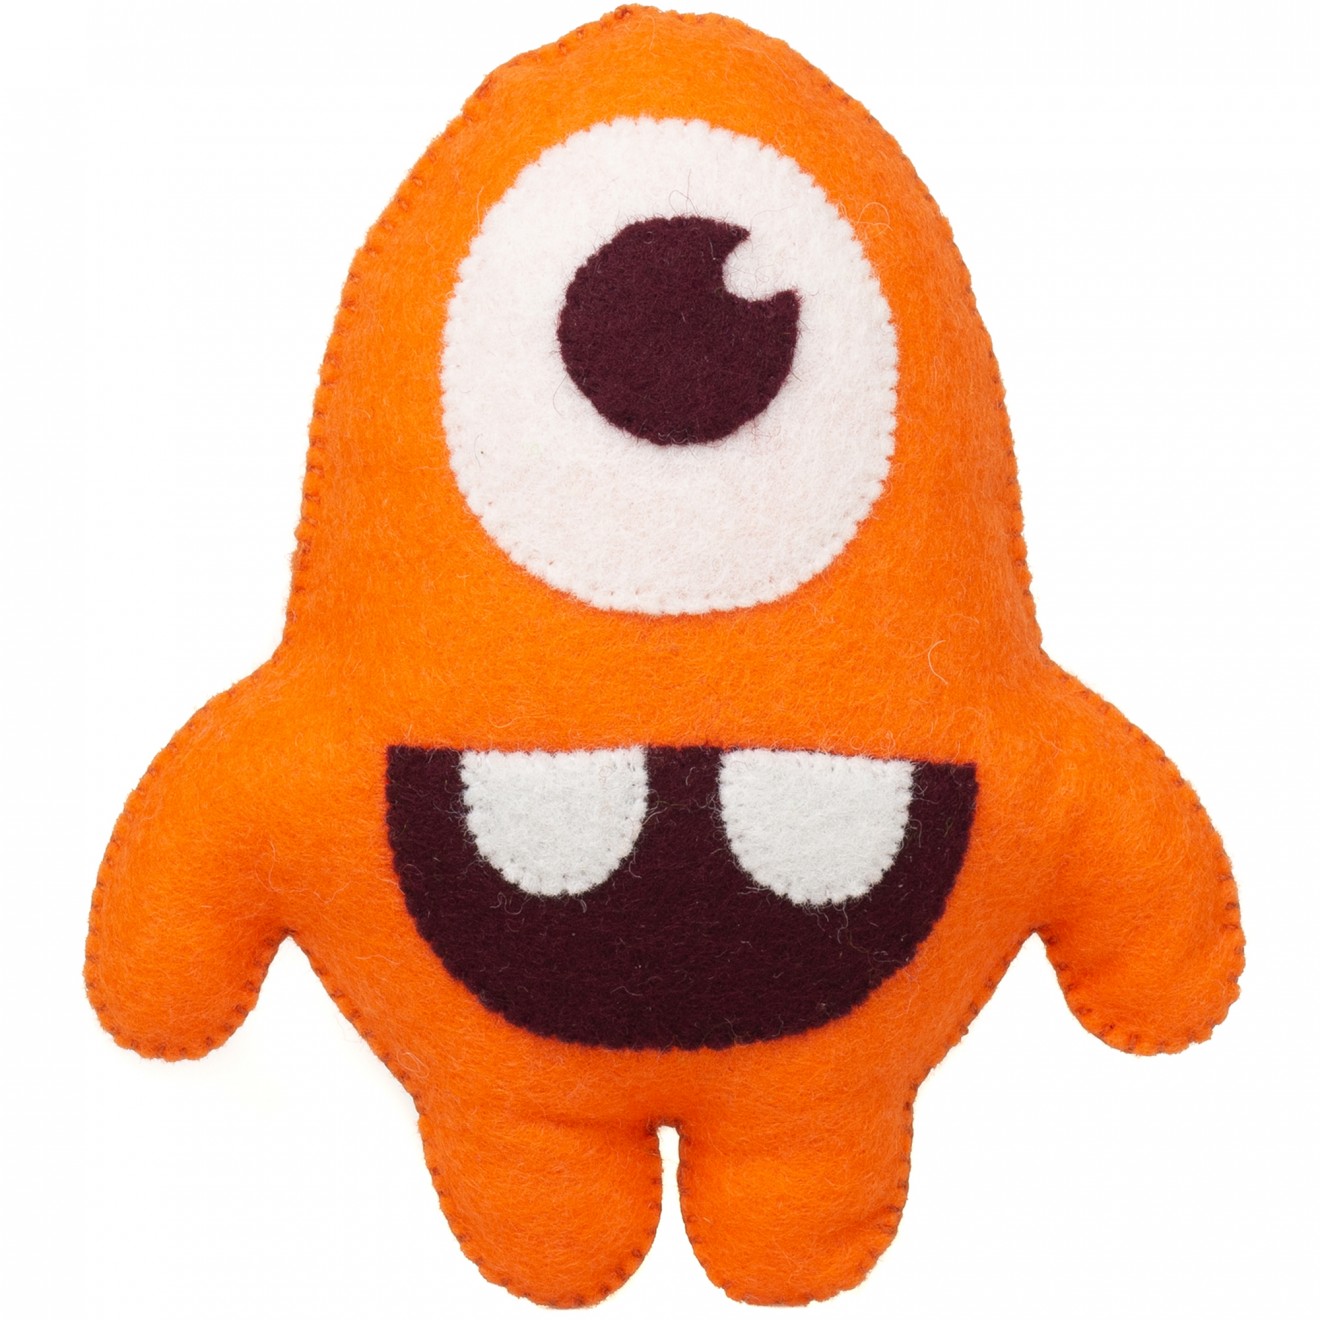 Image of the product Orange Eddy, from the product category Cuddly toys